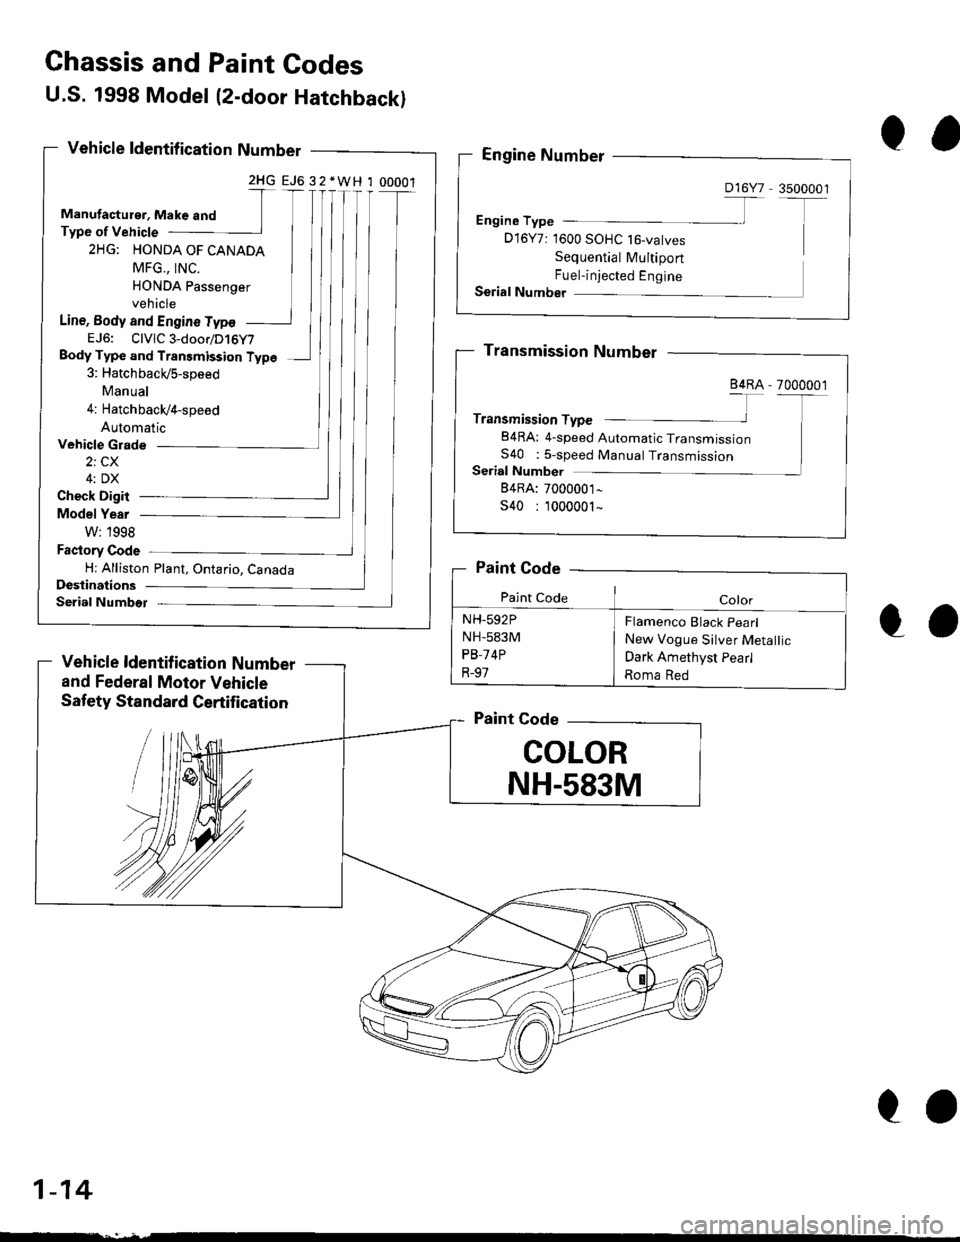 HONDA CIVIC 1998 6.G User Guide Ghassis and Paint Godes
Vehicle Grade
2i CX
4: DX
Check Digit
Model Year
W: 1998
Factory Code
Hr Alliston Plant, Ontario, CanadaDeslinations
Serial Numbet
Vehicle ldentif ication Number
and Federal Mo